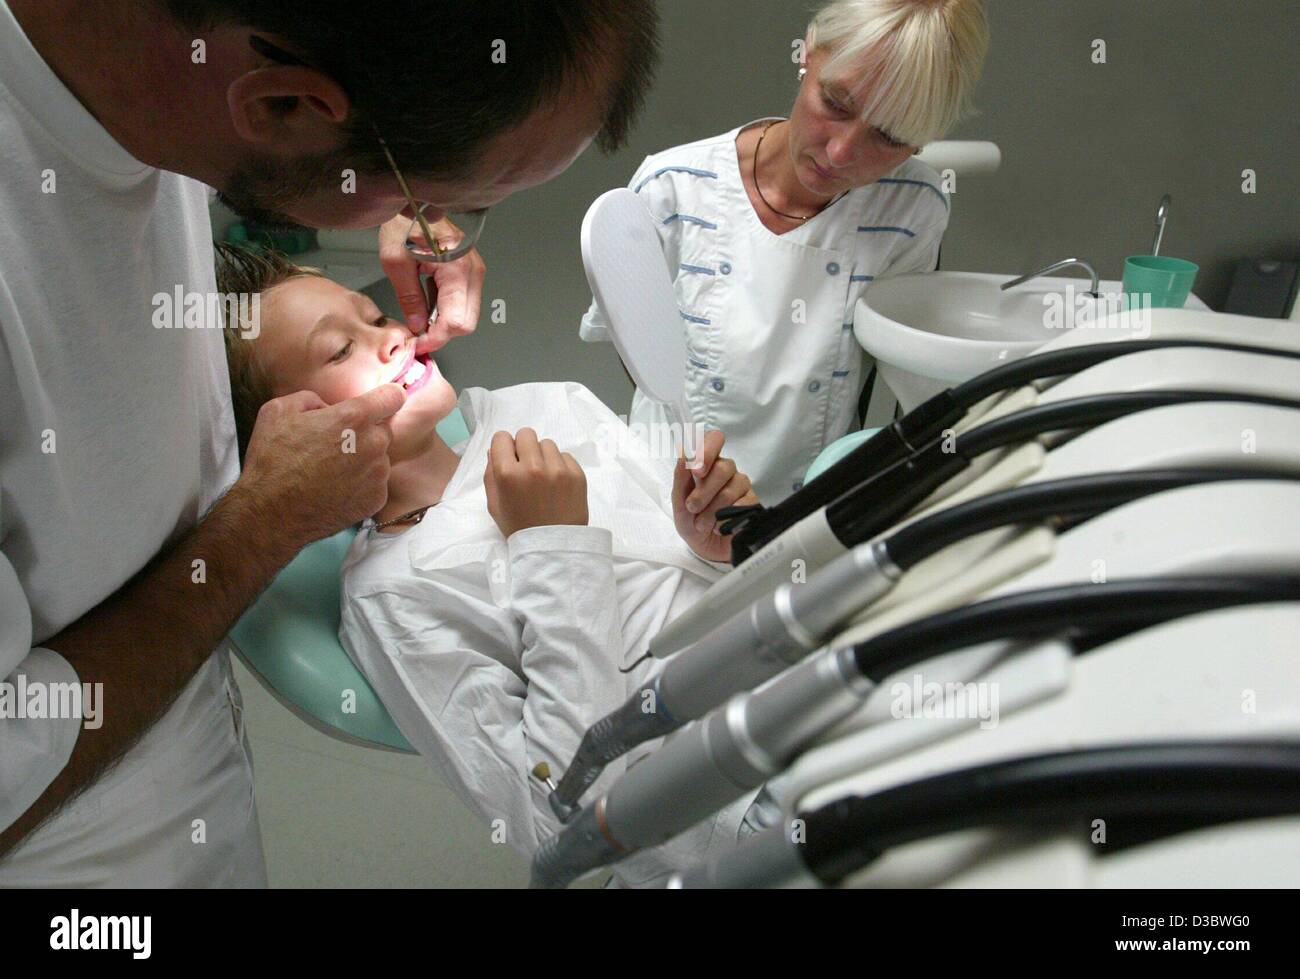 (dpa) - A dentist examines the teeth of a boy in a practice in Magdeburg, Germany, 18 August 2003. The envisaged healthcare reform of the German government will result in deep cuts in the health and welfare systems. Germany's expensive healthcare system which is funded entirely by levies on payrolls Stock Photo